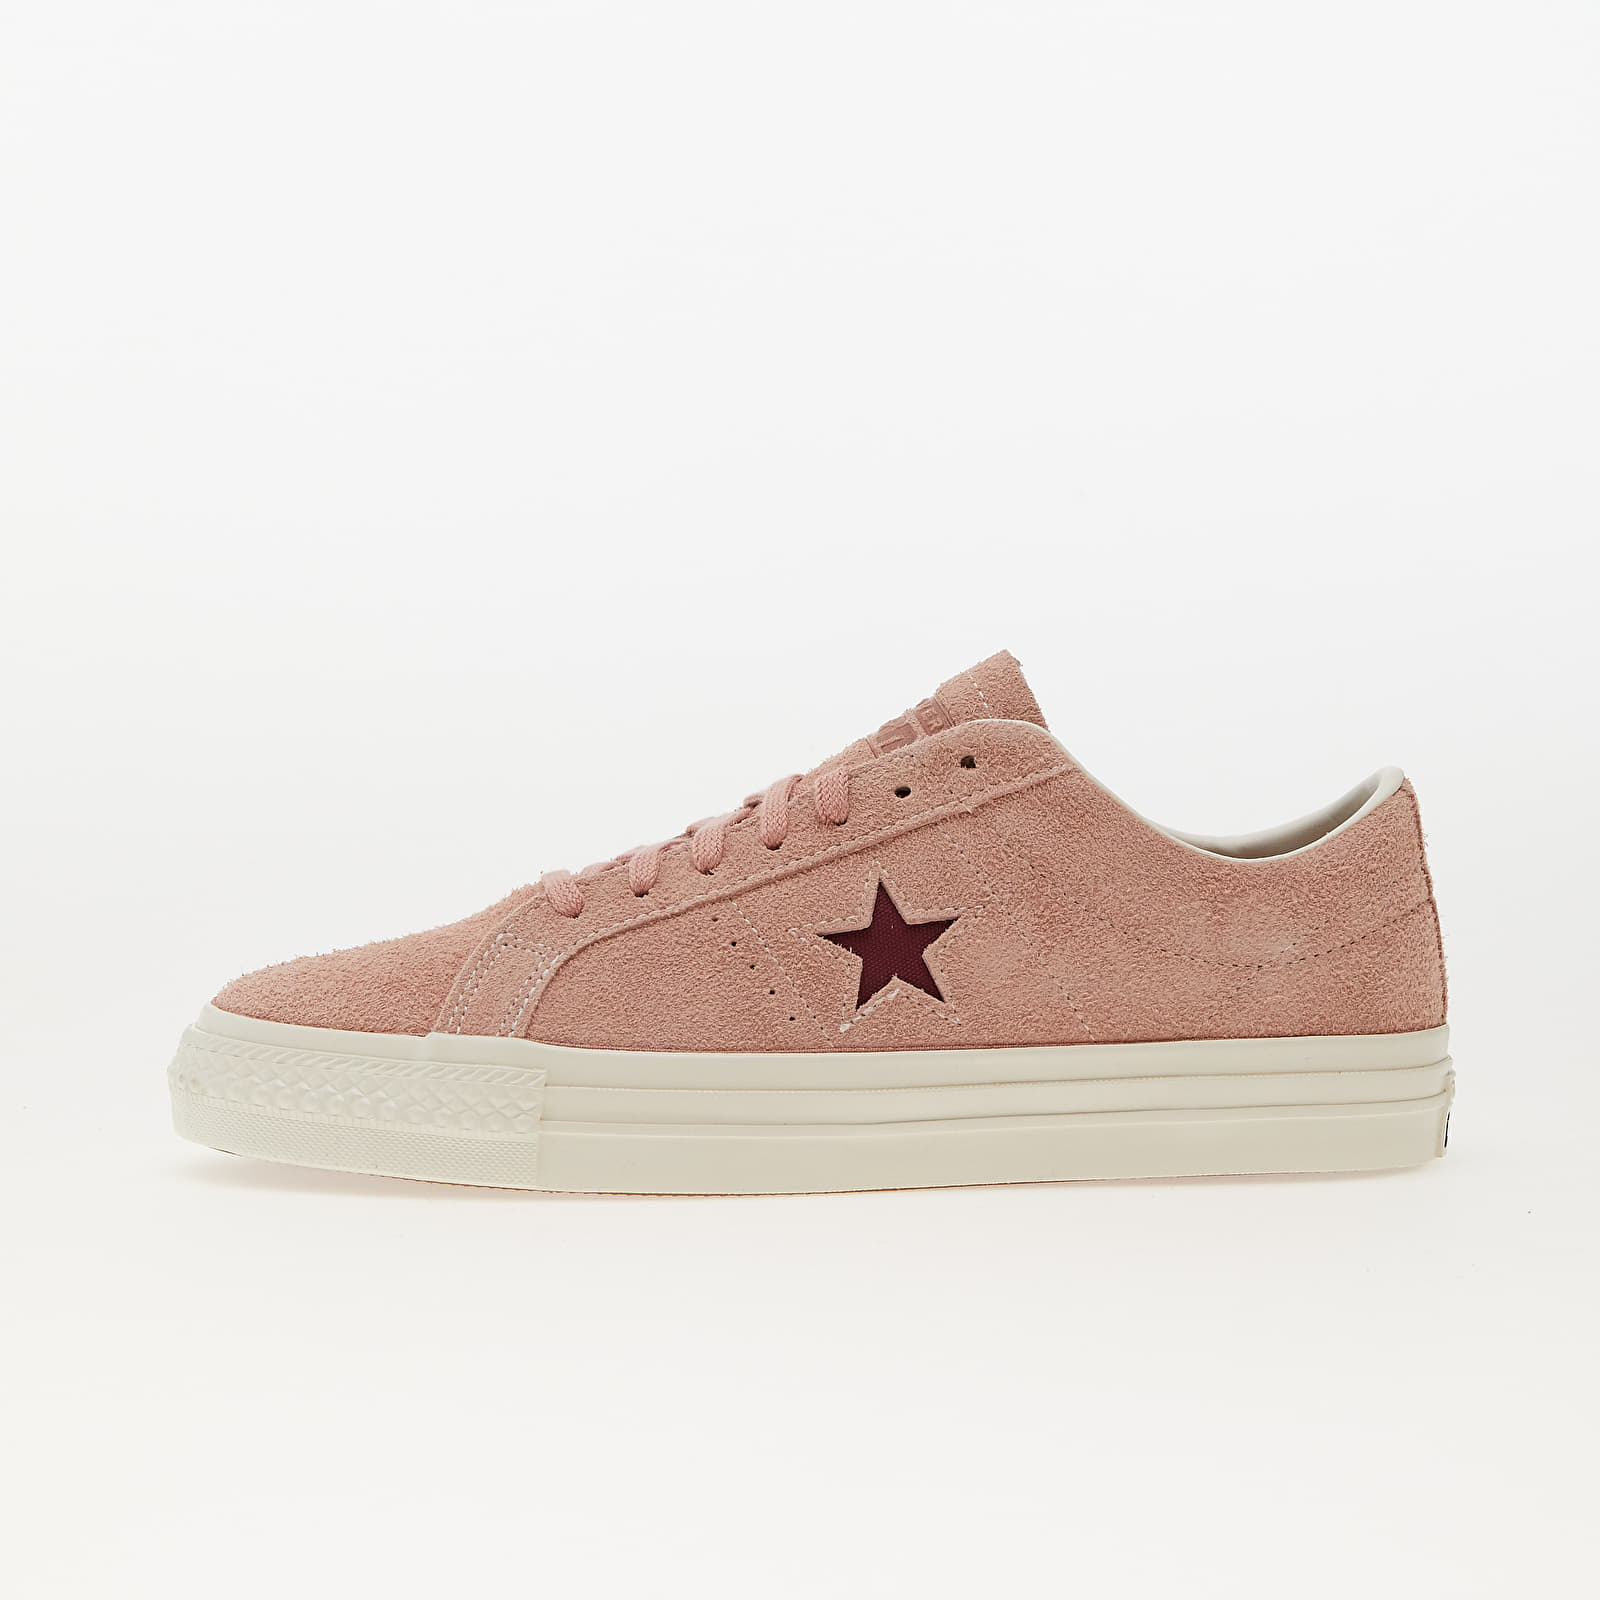 Men's shoes Converse One Star Pro Canyon Dusk/ Cherry Vision